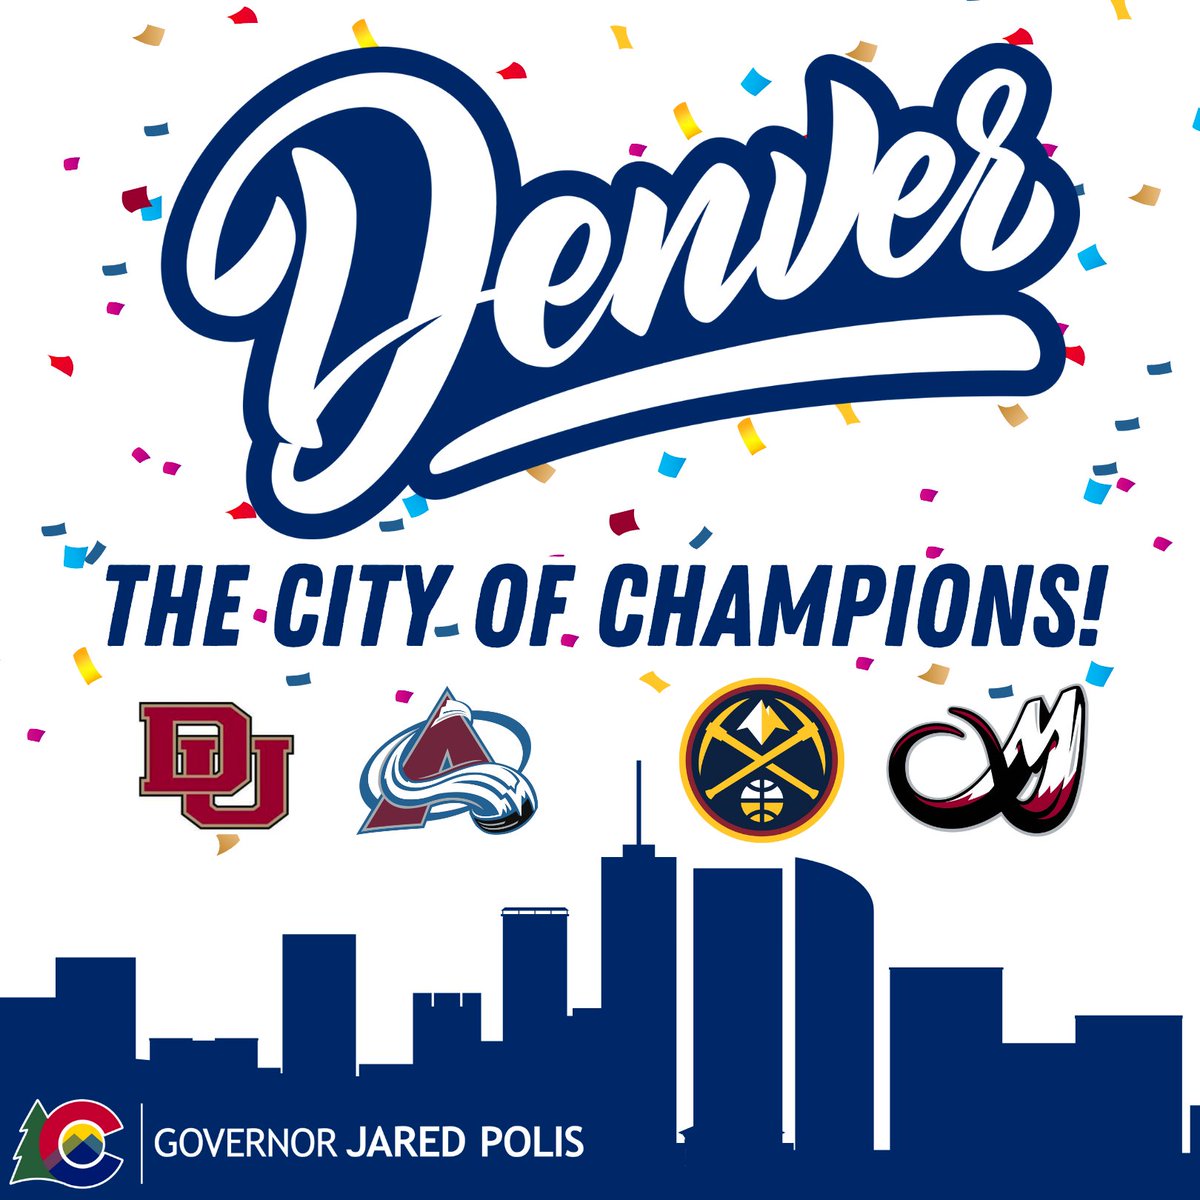 Since 2022, Denver has won 2 NCAA Hockey Championships, a Stanley Cup, an NBA Championship, and a NLL Championship. Denver is the city of Champions!